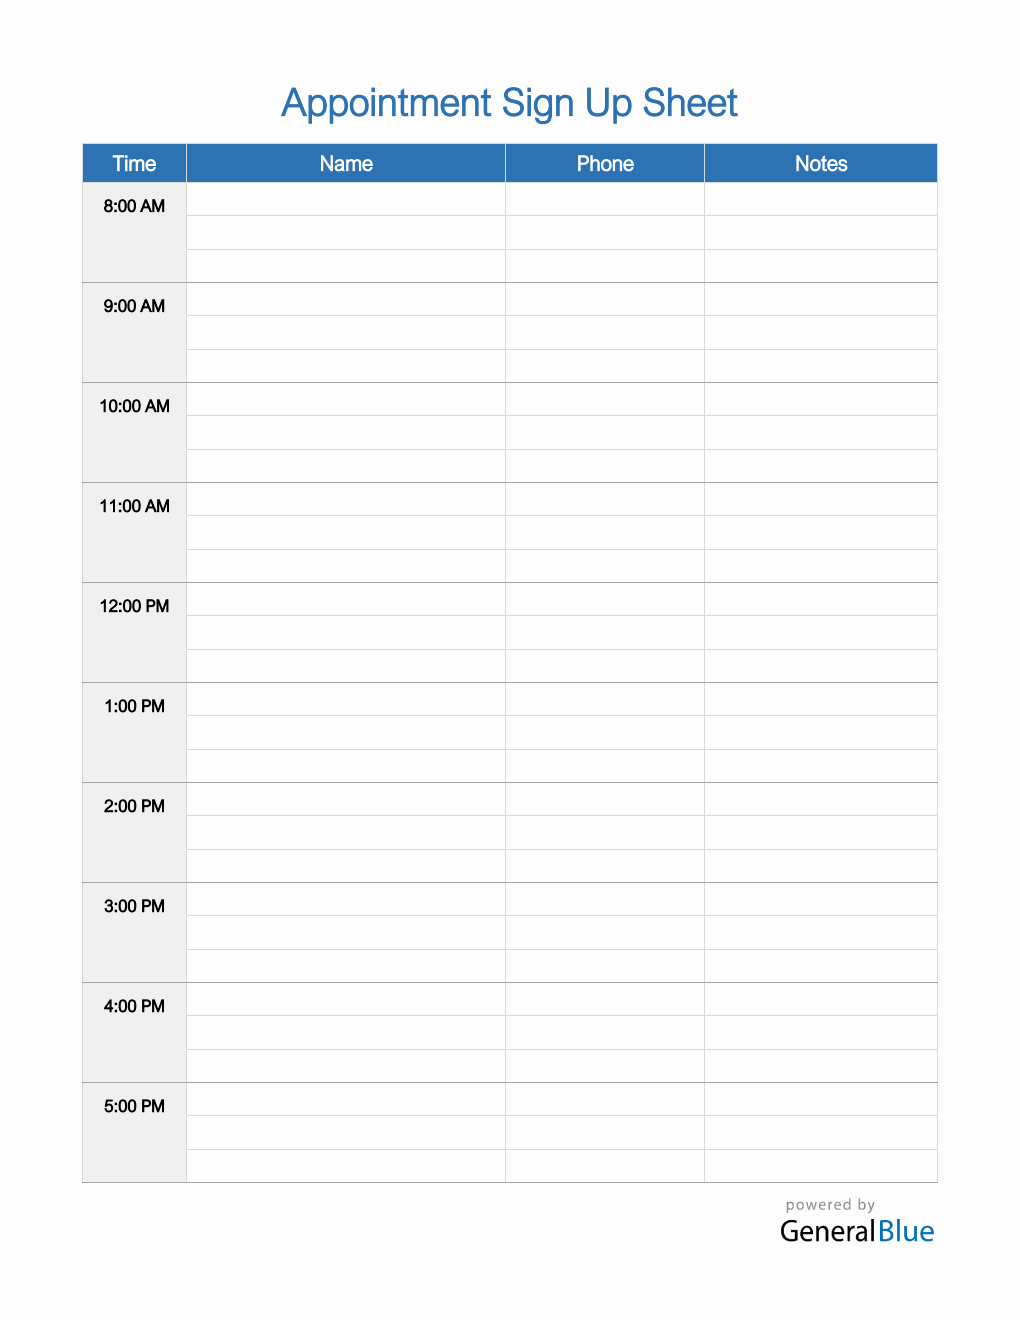 Appointment Sign Up Sheet in PDF